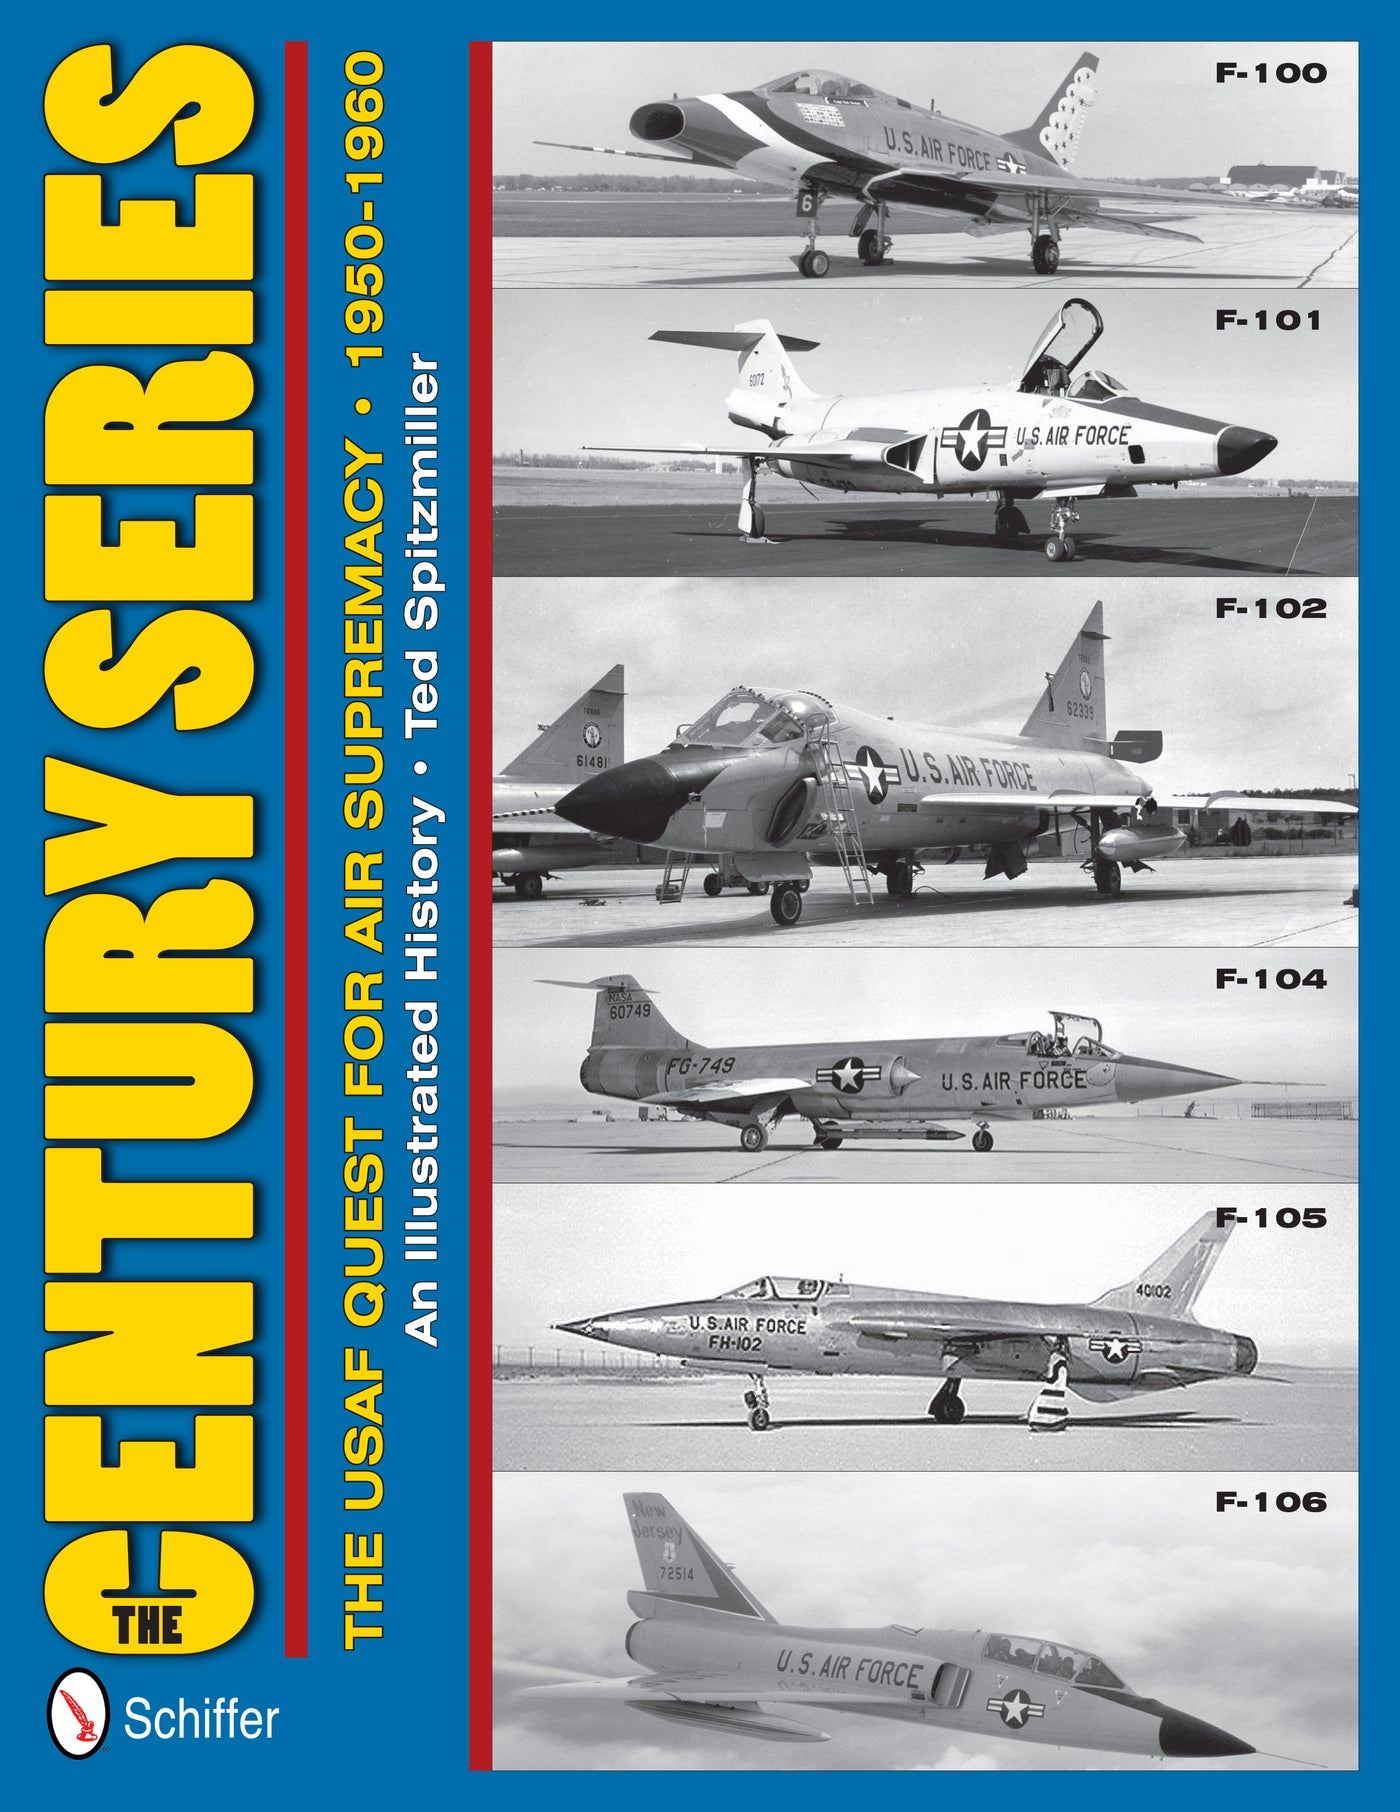 The Century Series: The USAF Quest for Air Supremacy, 1950-1960